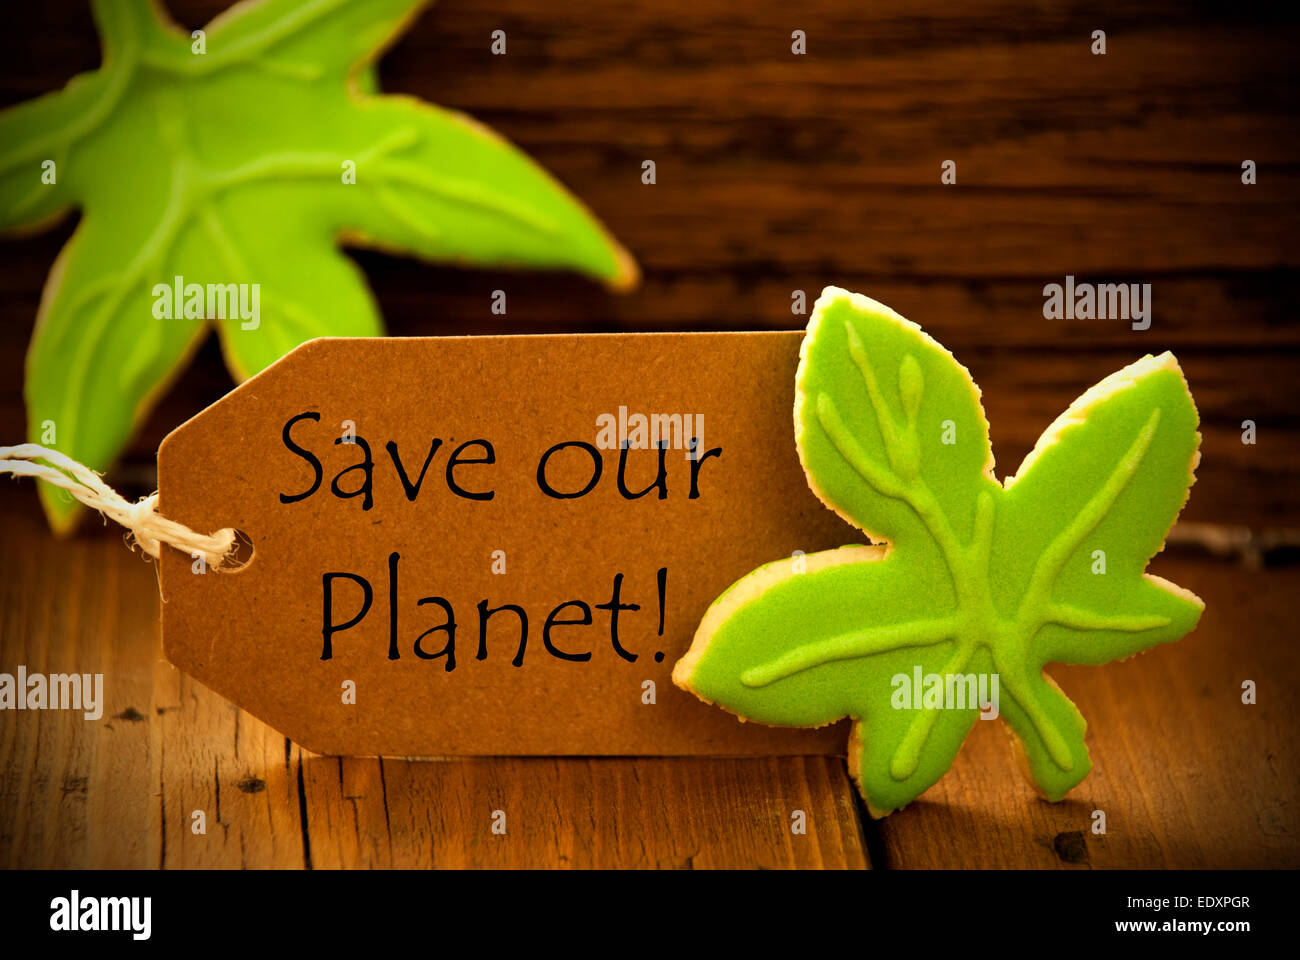 Brown Organic Label With English Text Save Our Planet On Wooden Background With Two Leaf Cookies And Frame Stock Photo